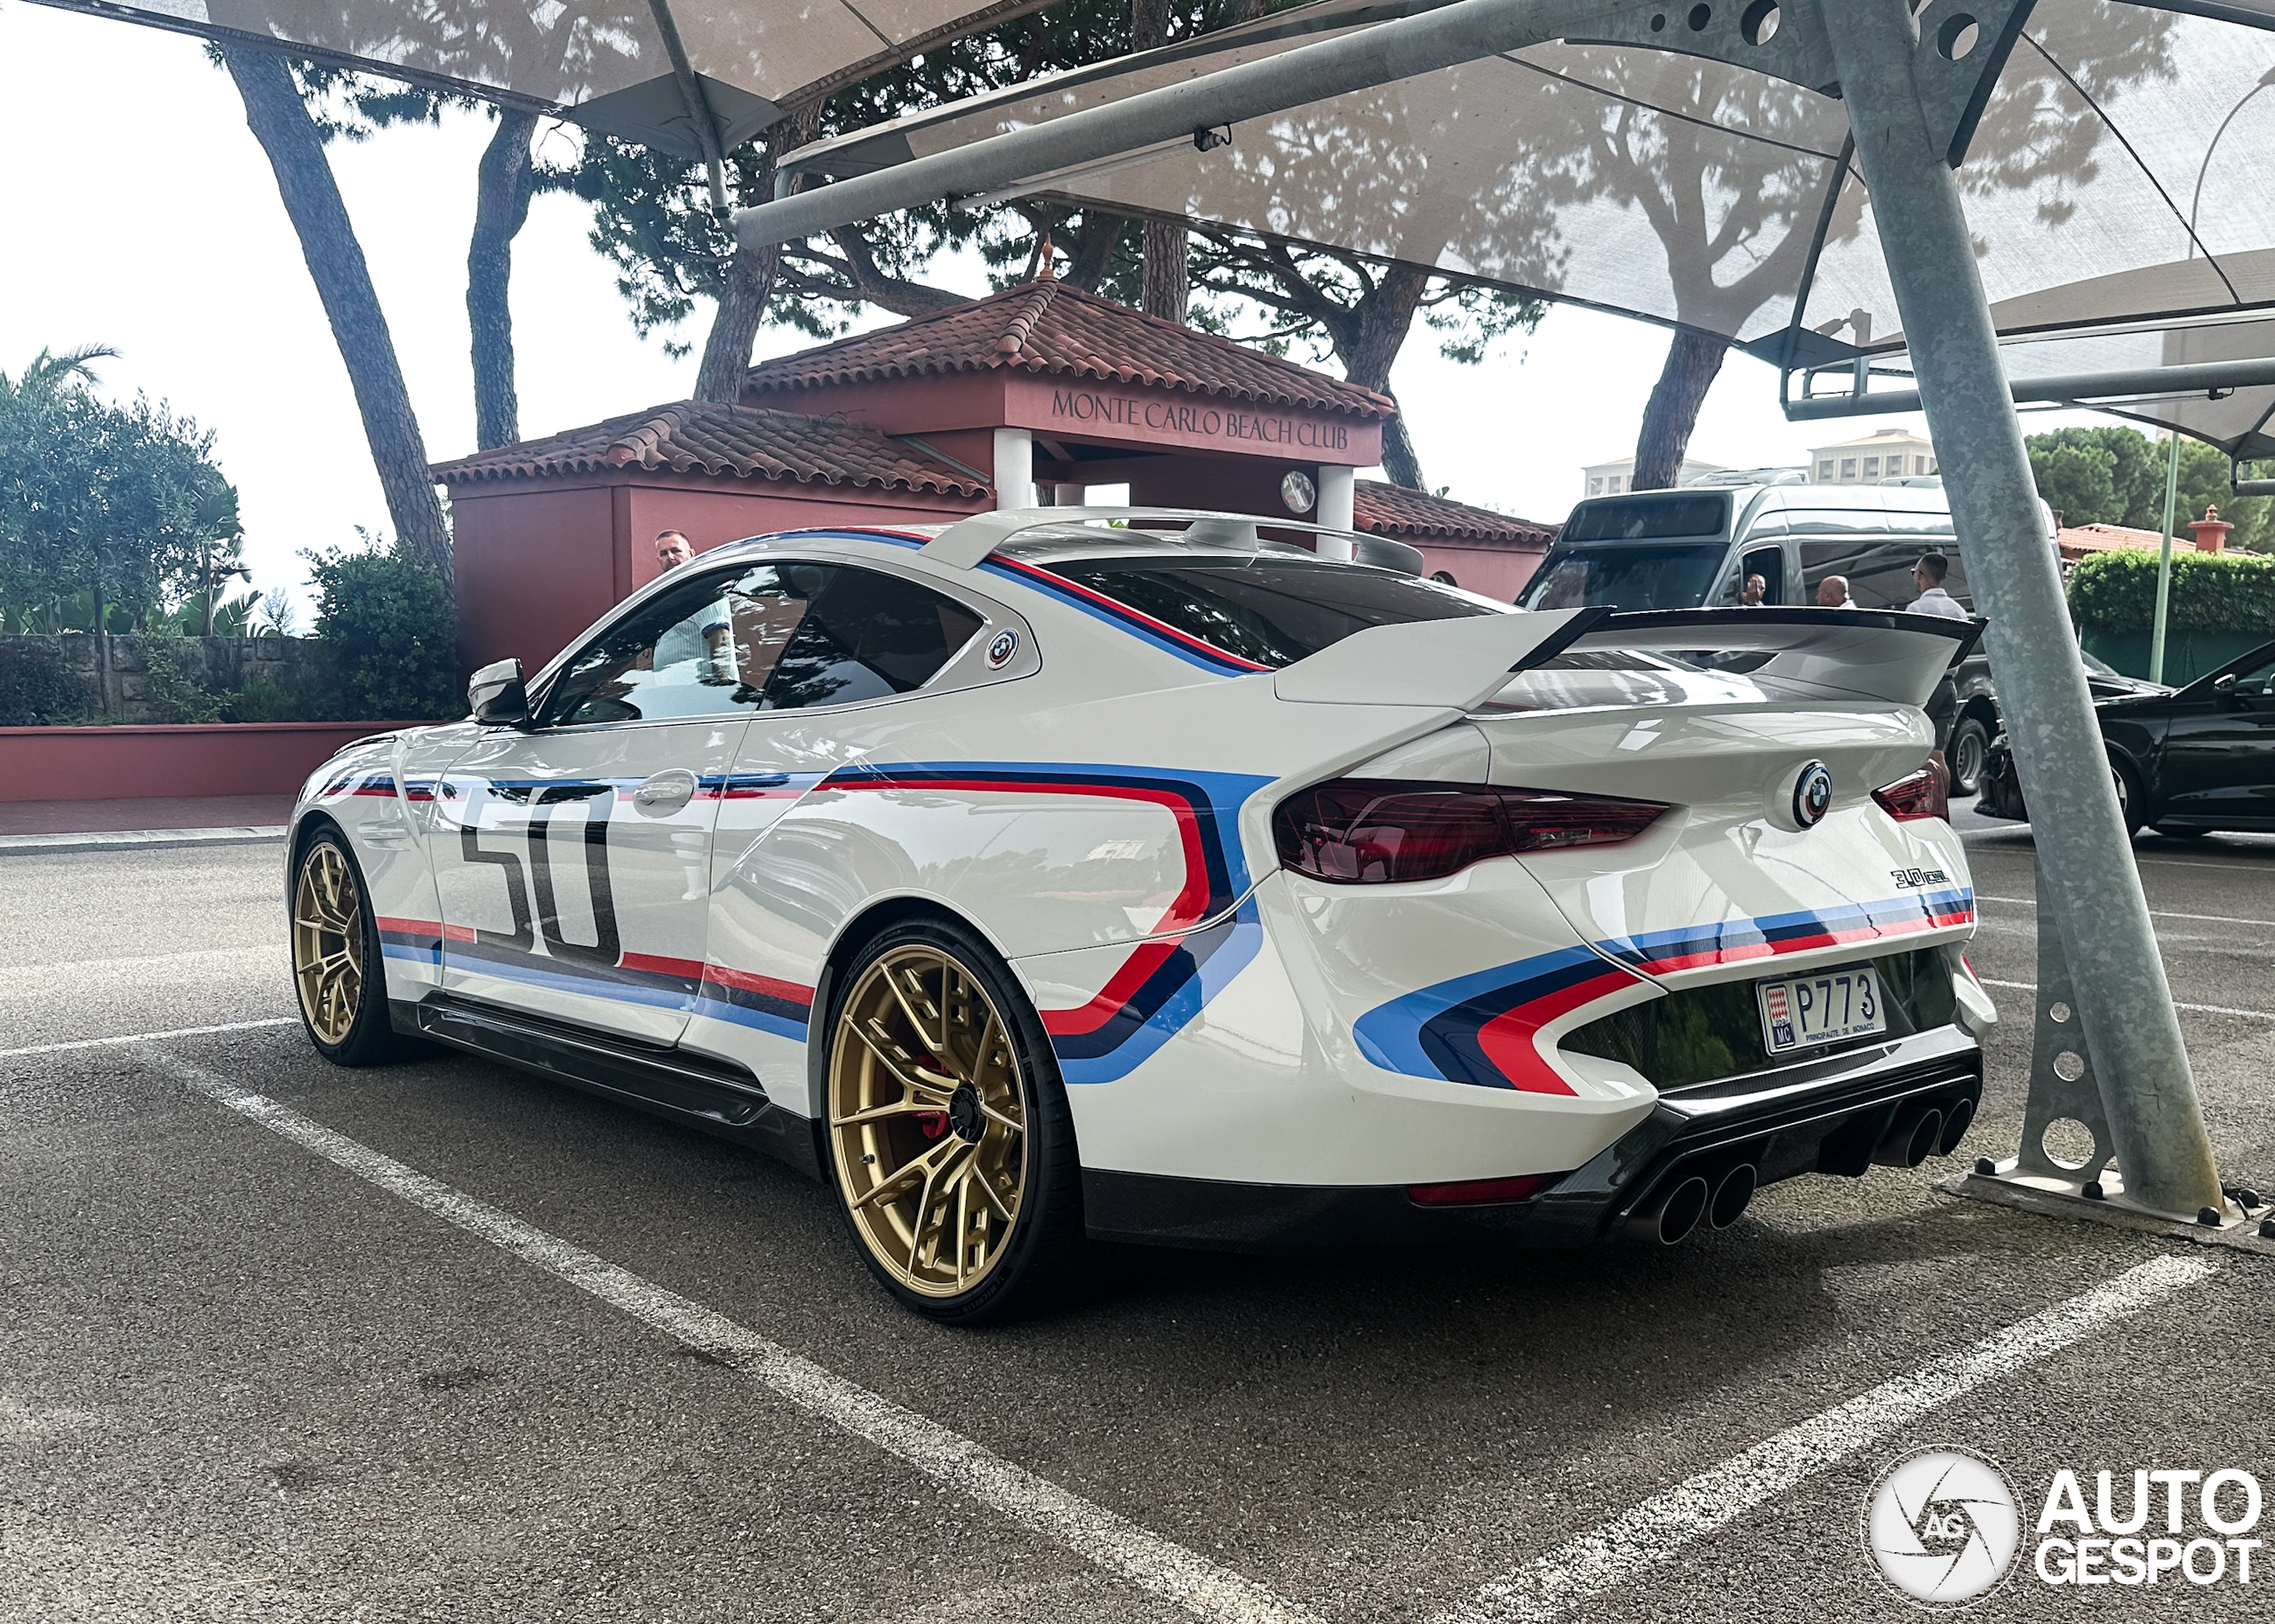 This is the first BMW 3.0 CSL without camouflage